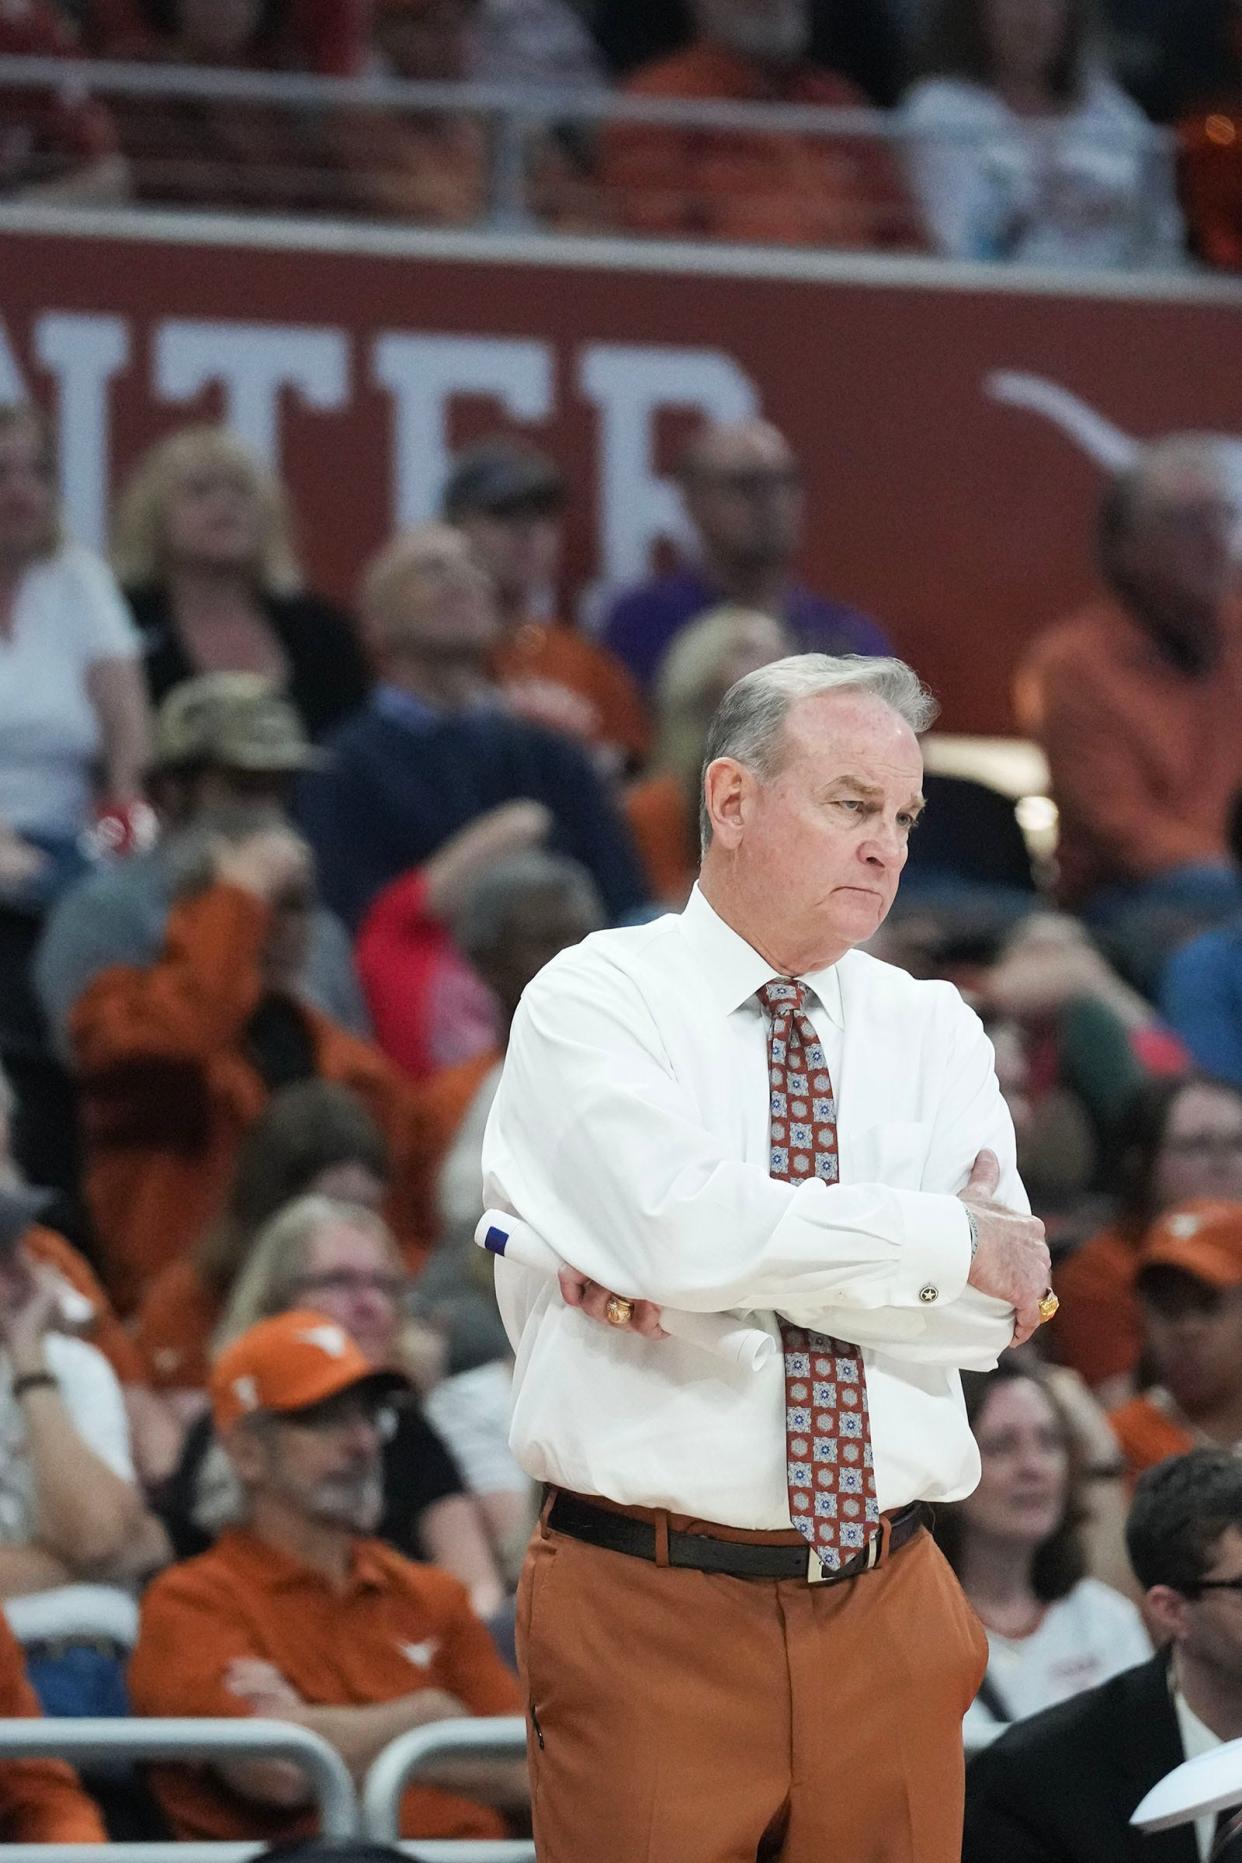 Texas women's basketball coach Vic Schaefer has worked the transfer portal to assemble a solid backcourt but still has work to do finding more forwards and centers.